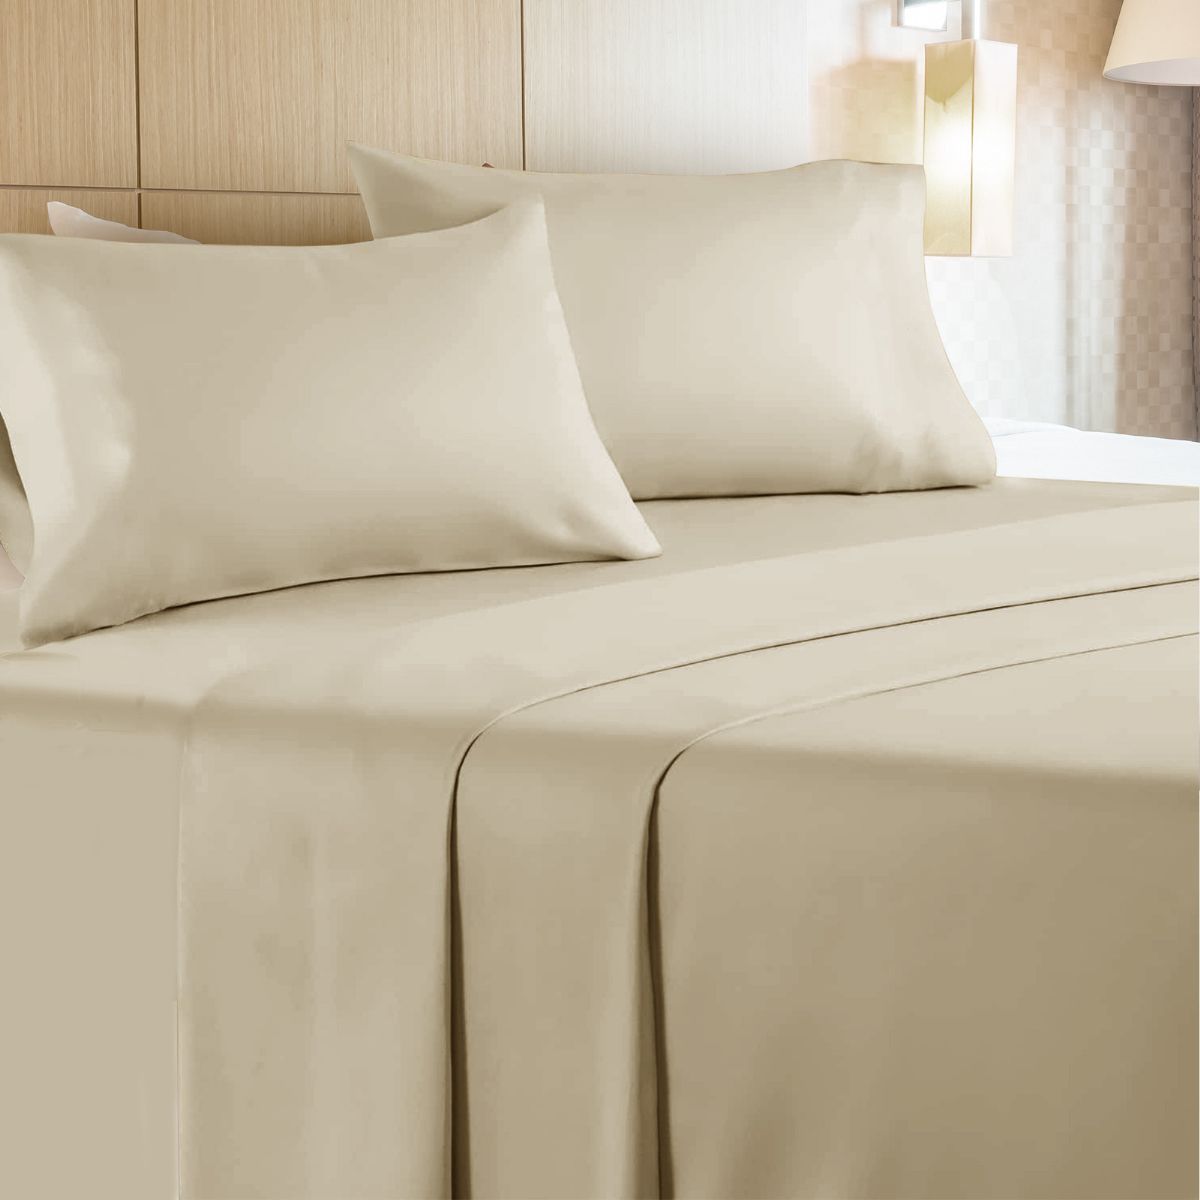 6 Sets of 4 Piece Microfiber Bed Sheet Set Twin Size In Camel